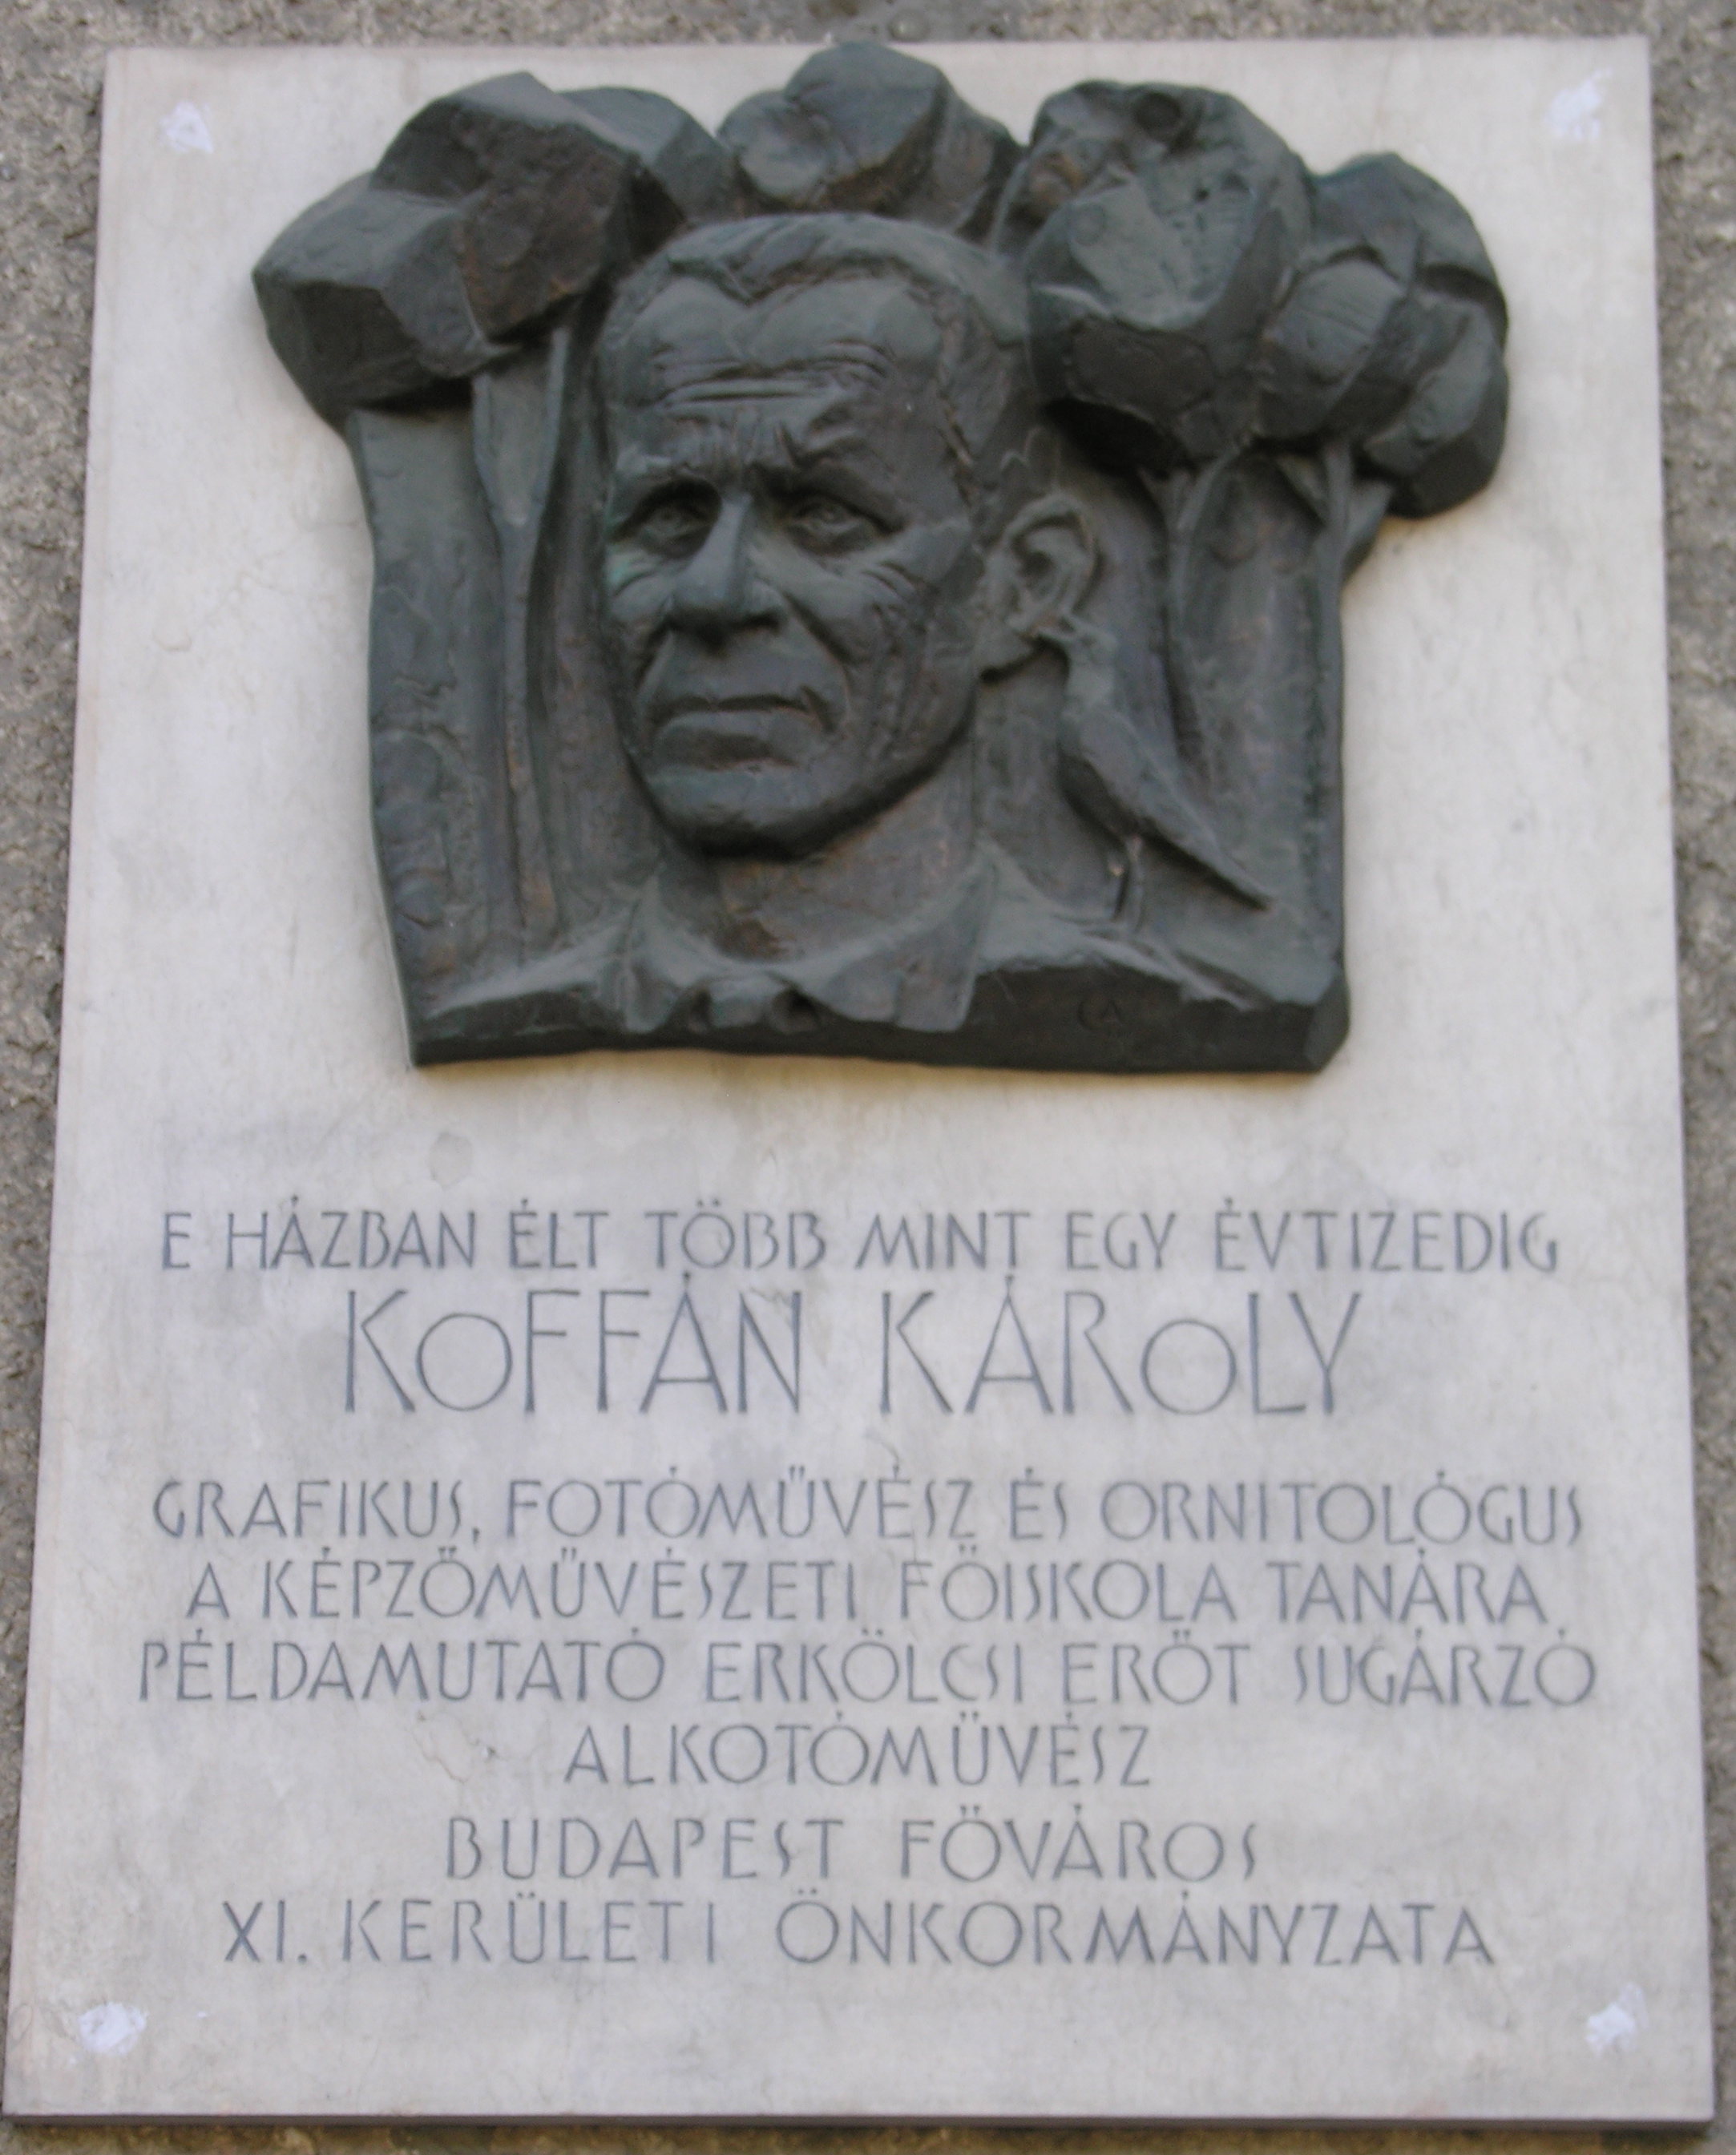 Image of Károly Koffán from Wikidata